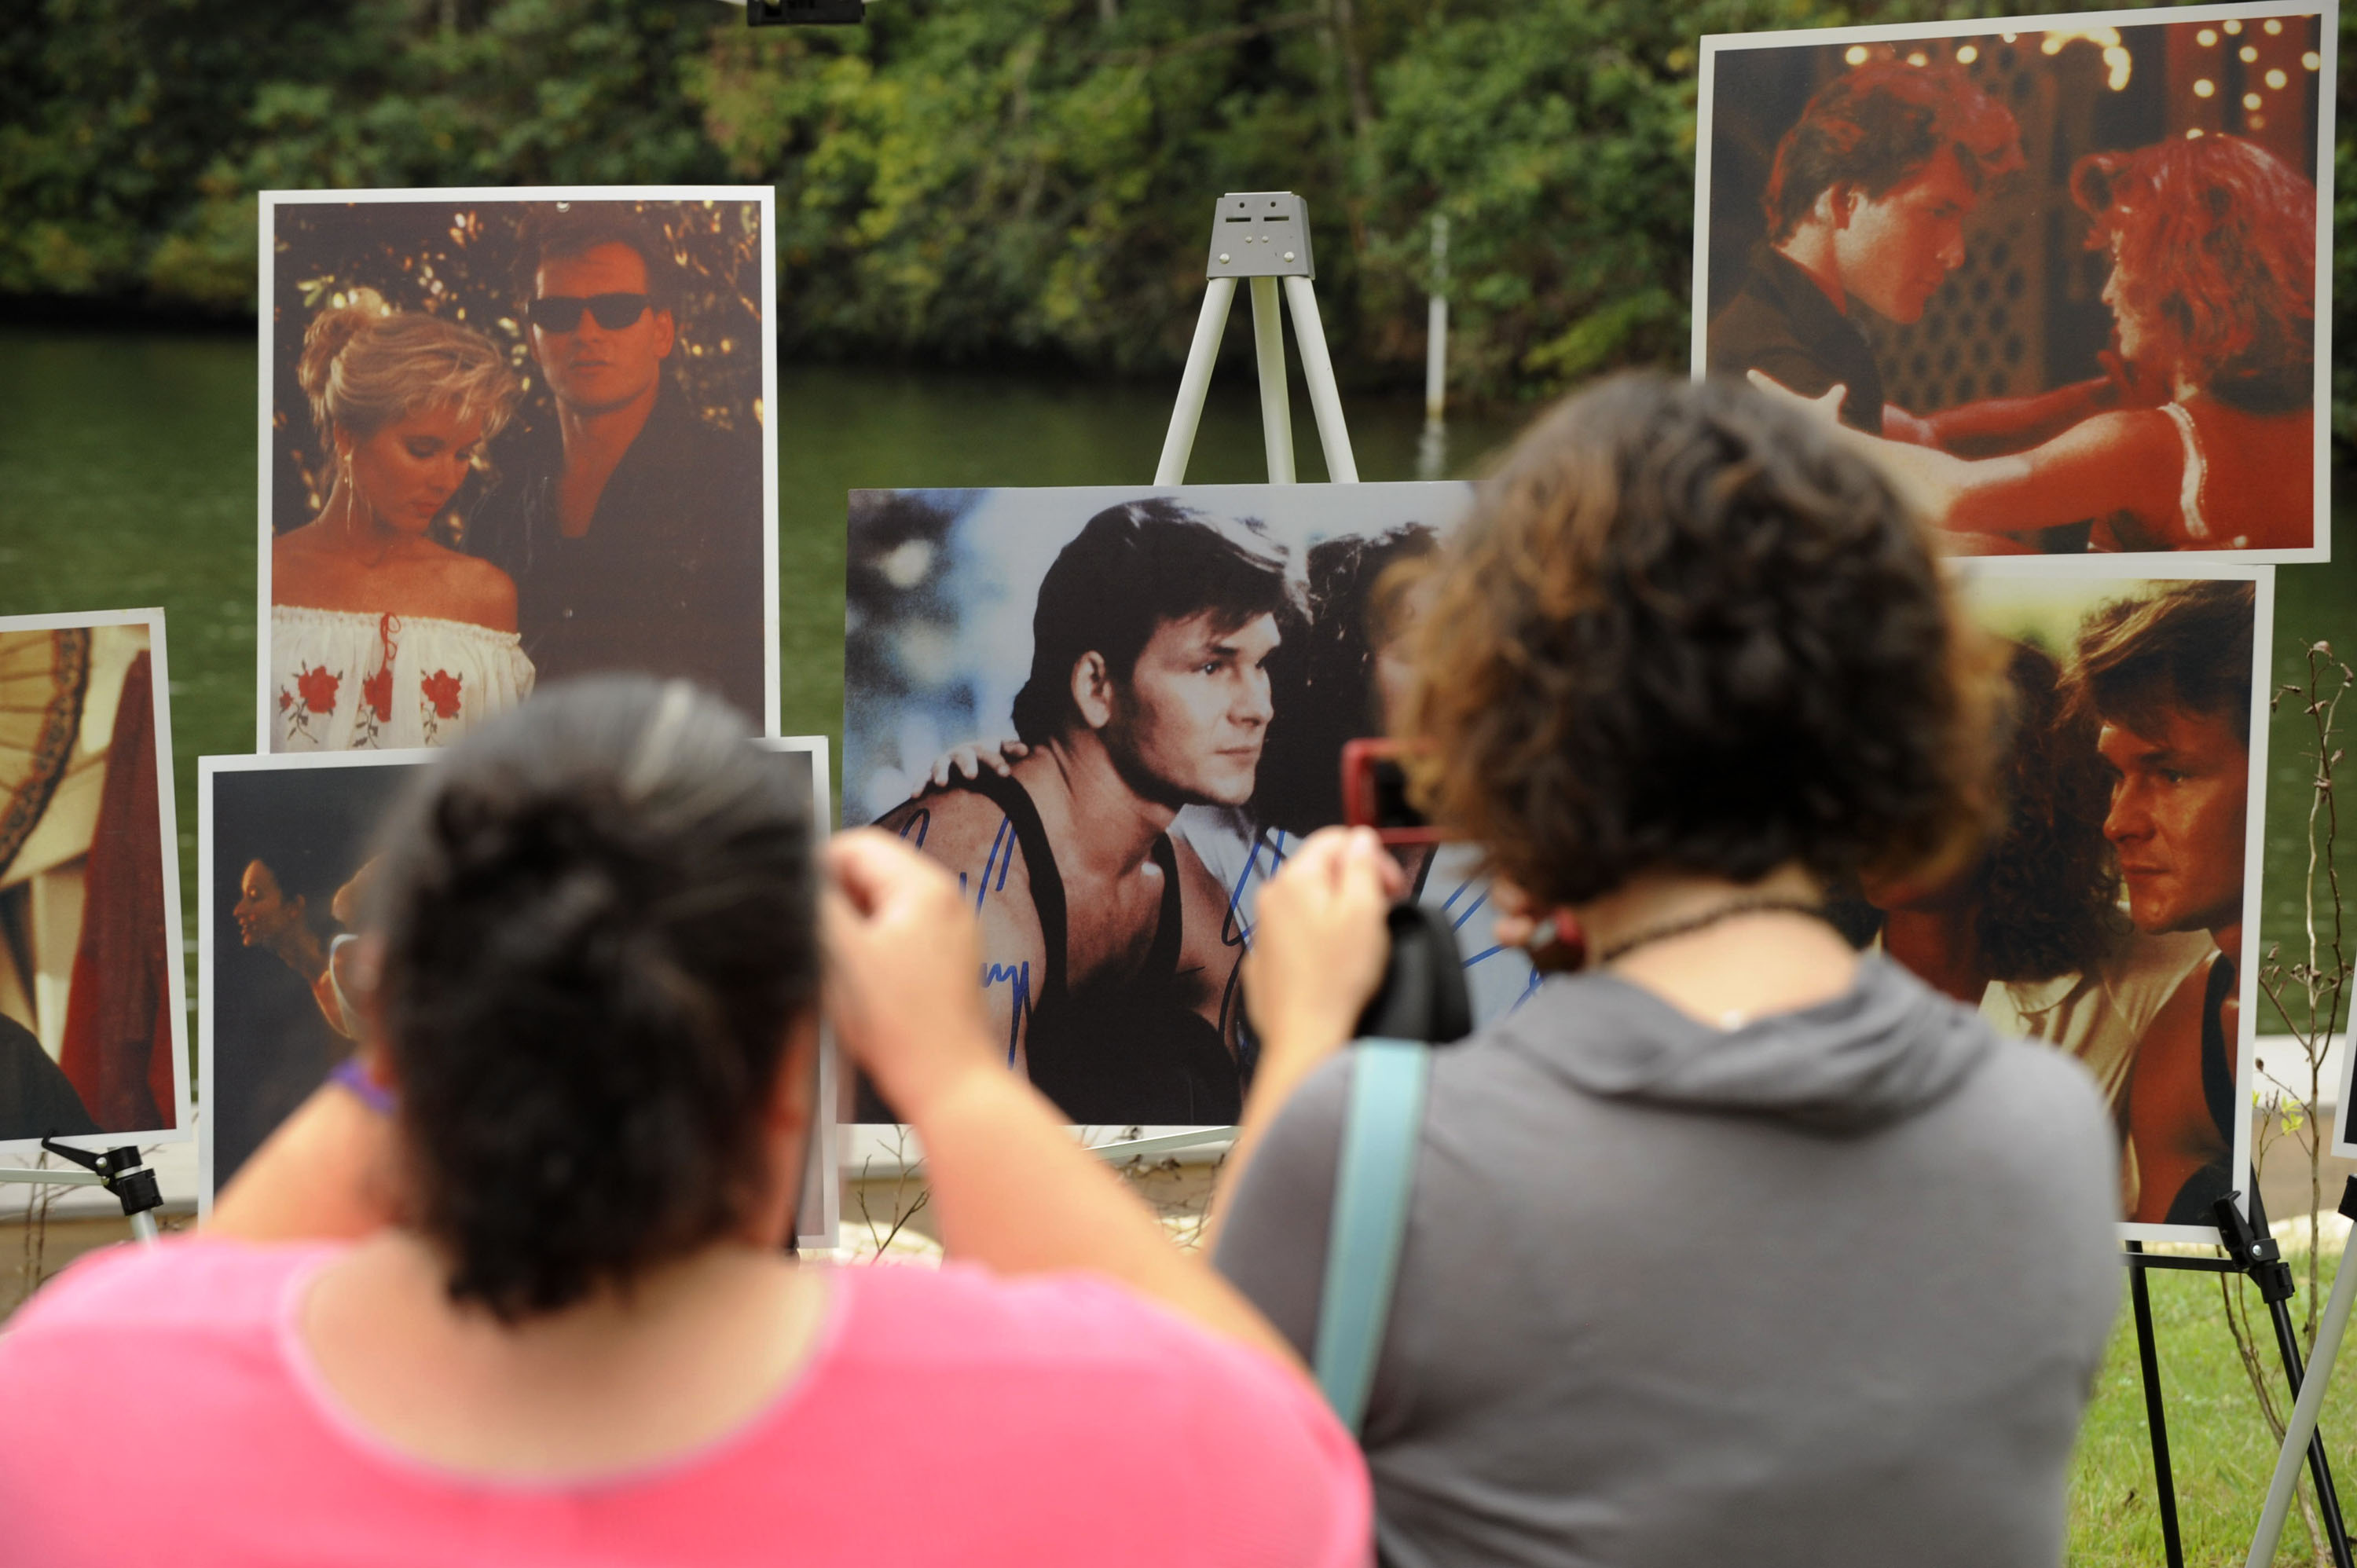 Fans photograph a gallery of images showing Patrick Swayze and Jennifer Grey from the movie "Dirty Dancing" prior to his memorial service on September 19, 2009, in Lake Lure, North Carolina. | Source: Getty Images